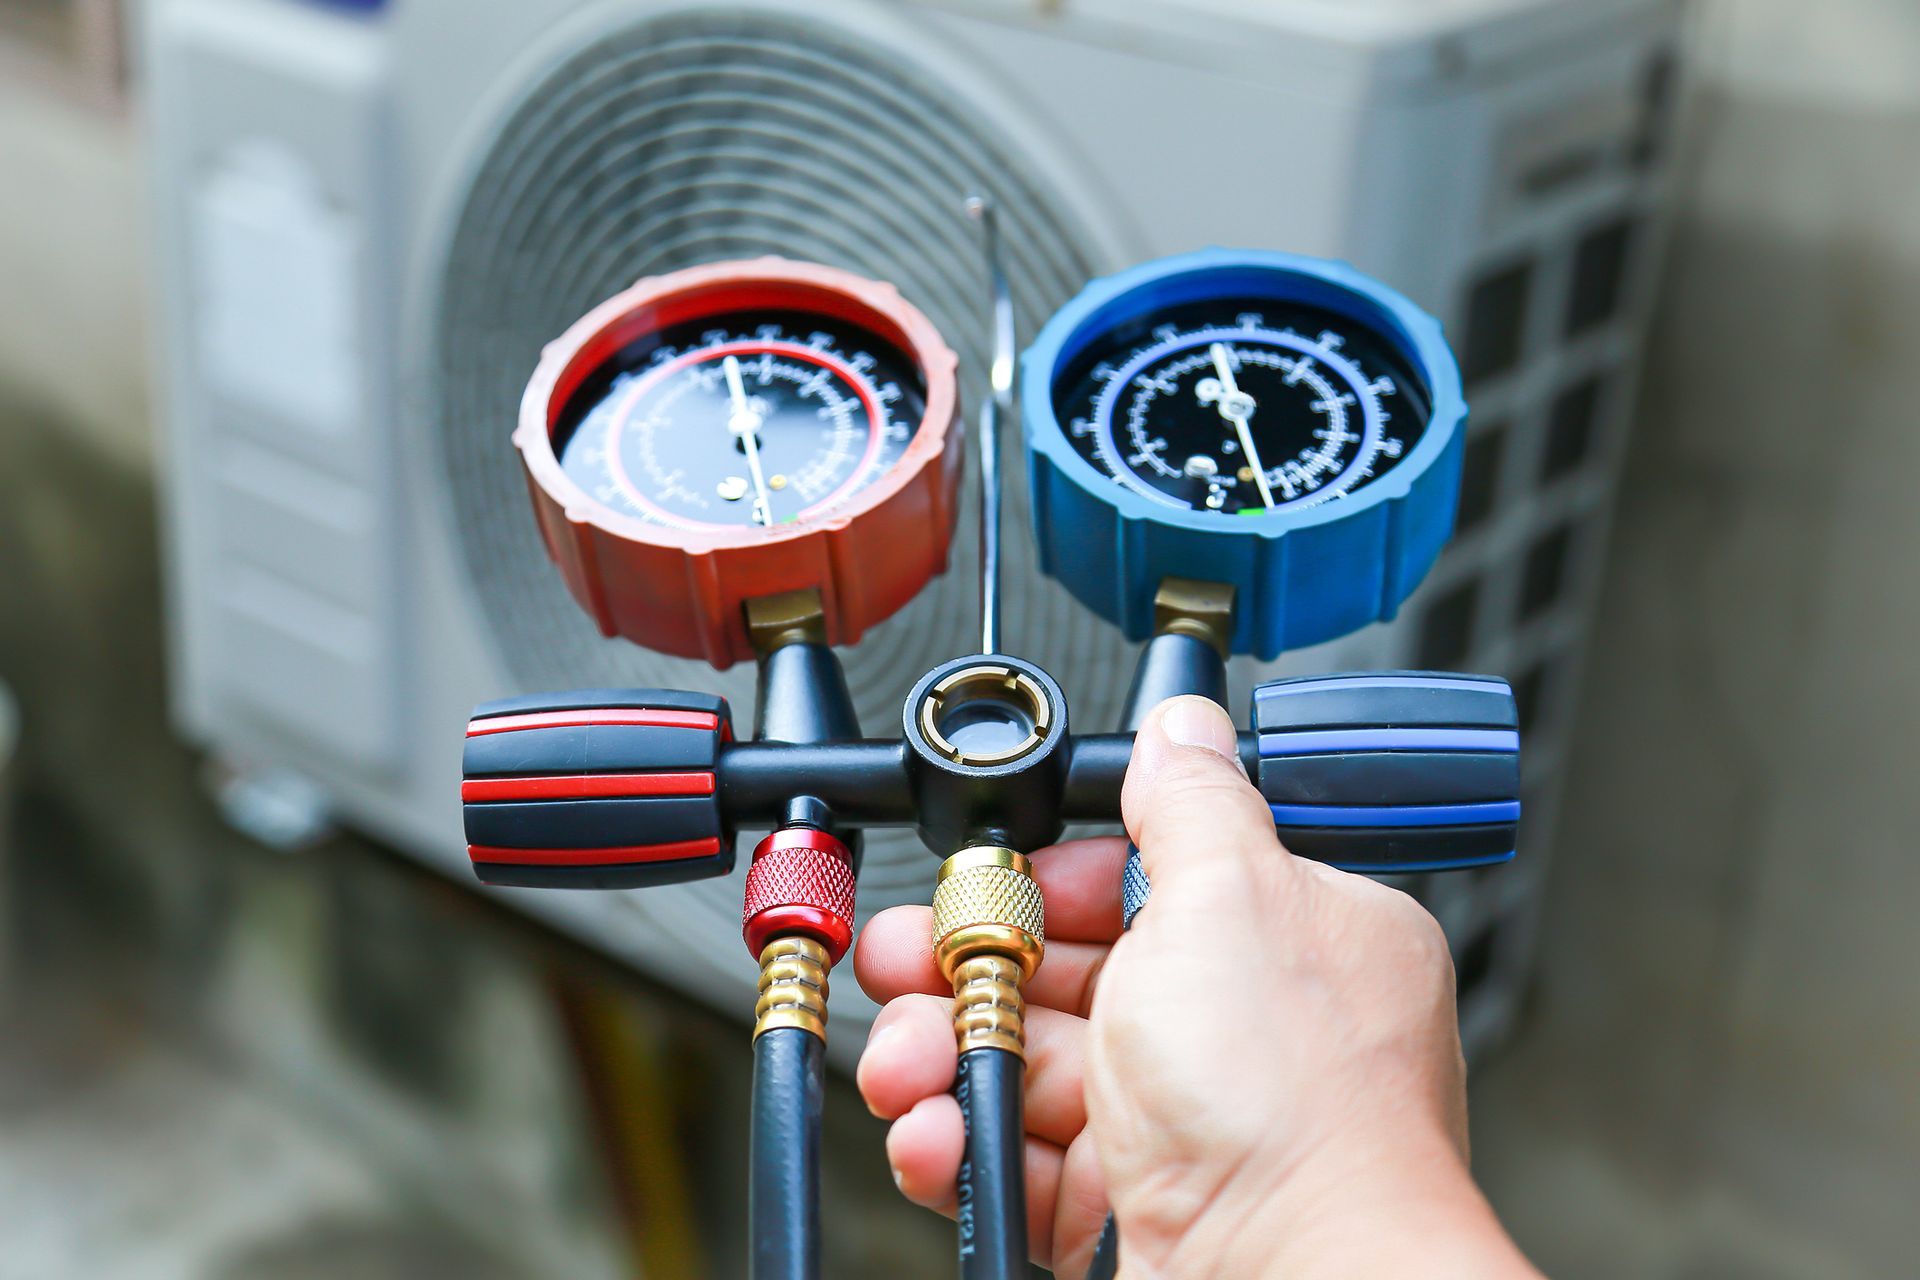 A person is holding two gauges in front of an air conditioner.